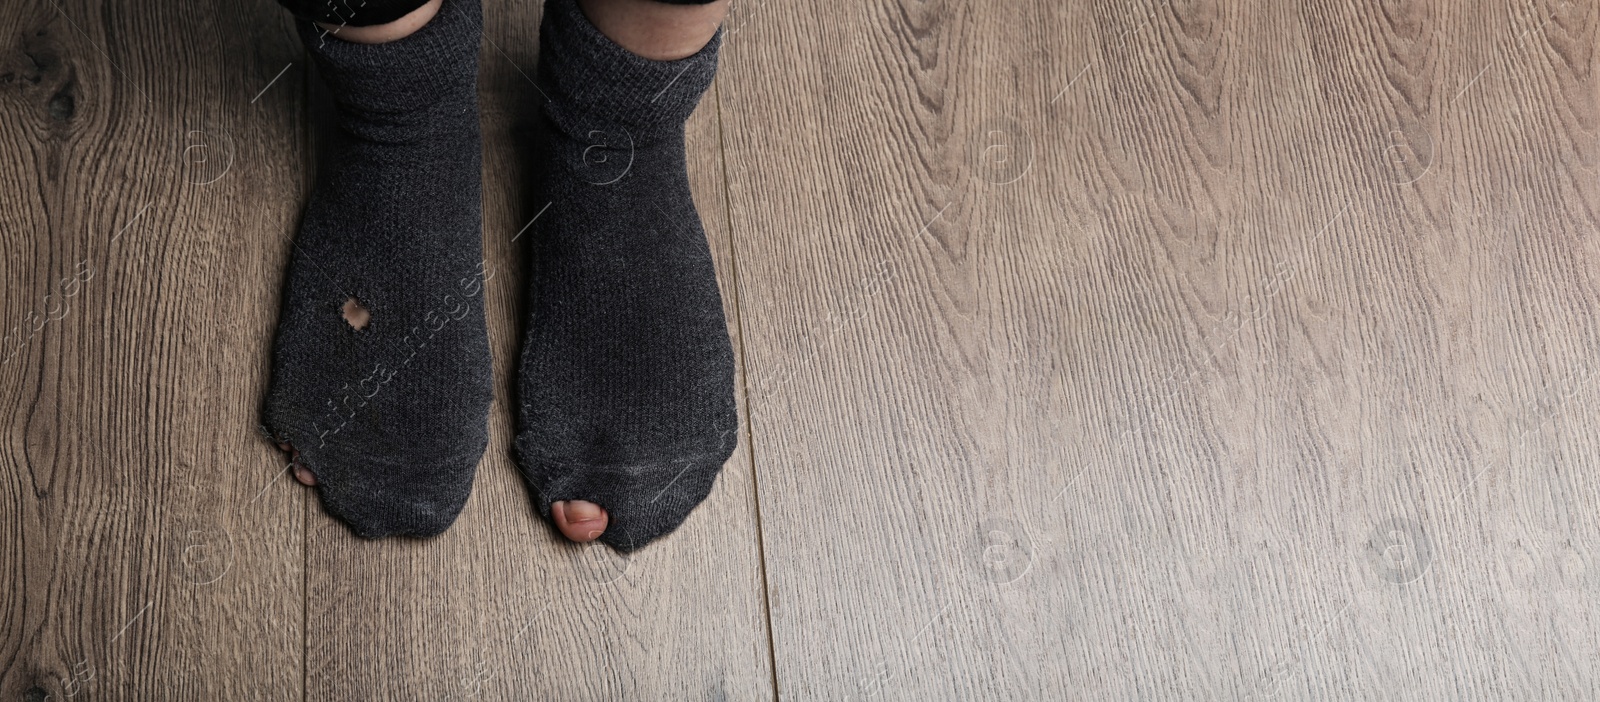 Image of Poor person in shabby socks on wooden floor, closeup view with space for text. Banner design